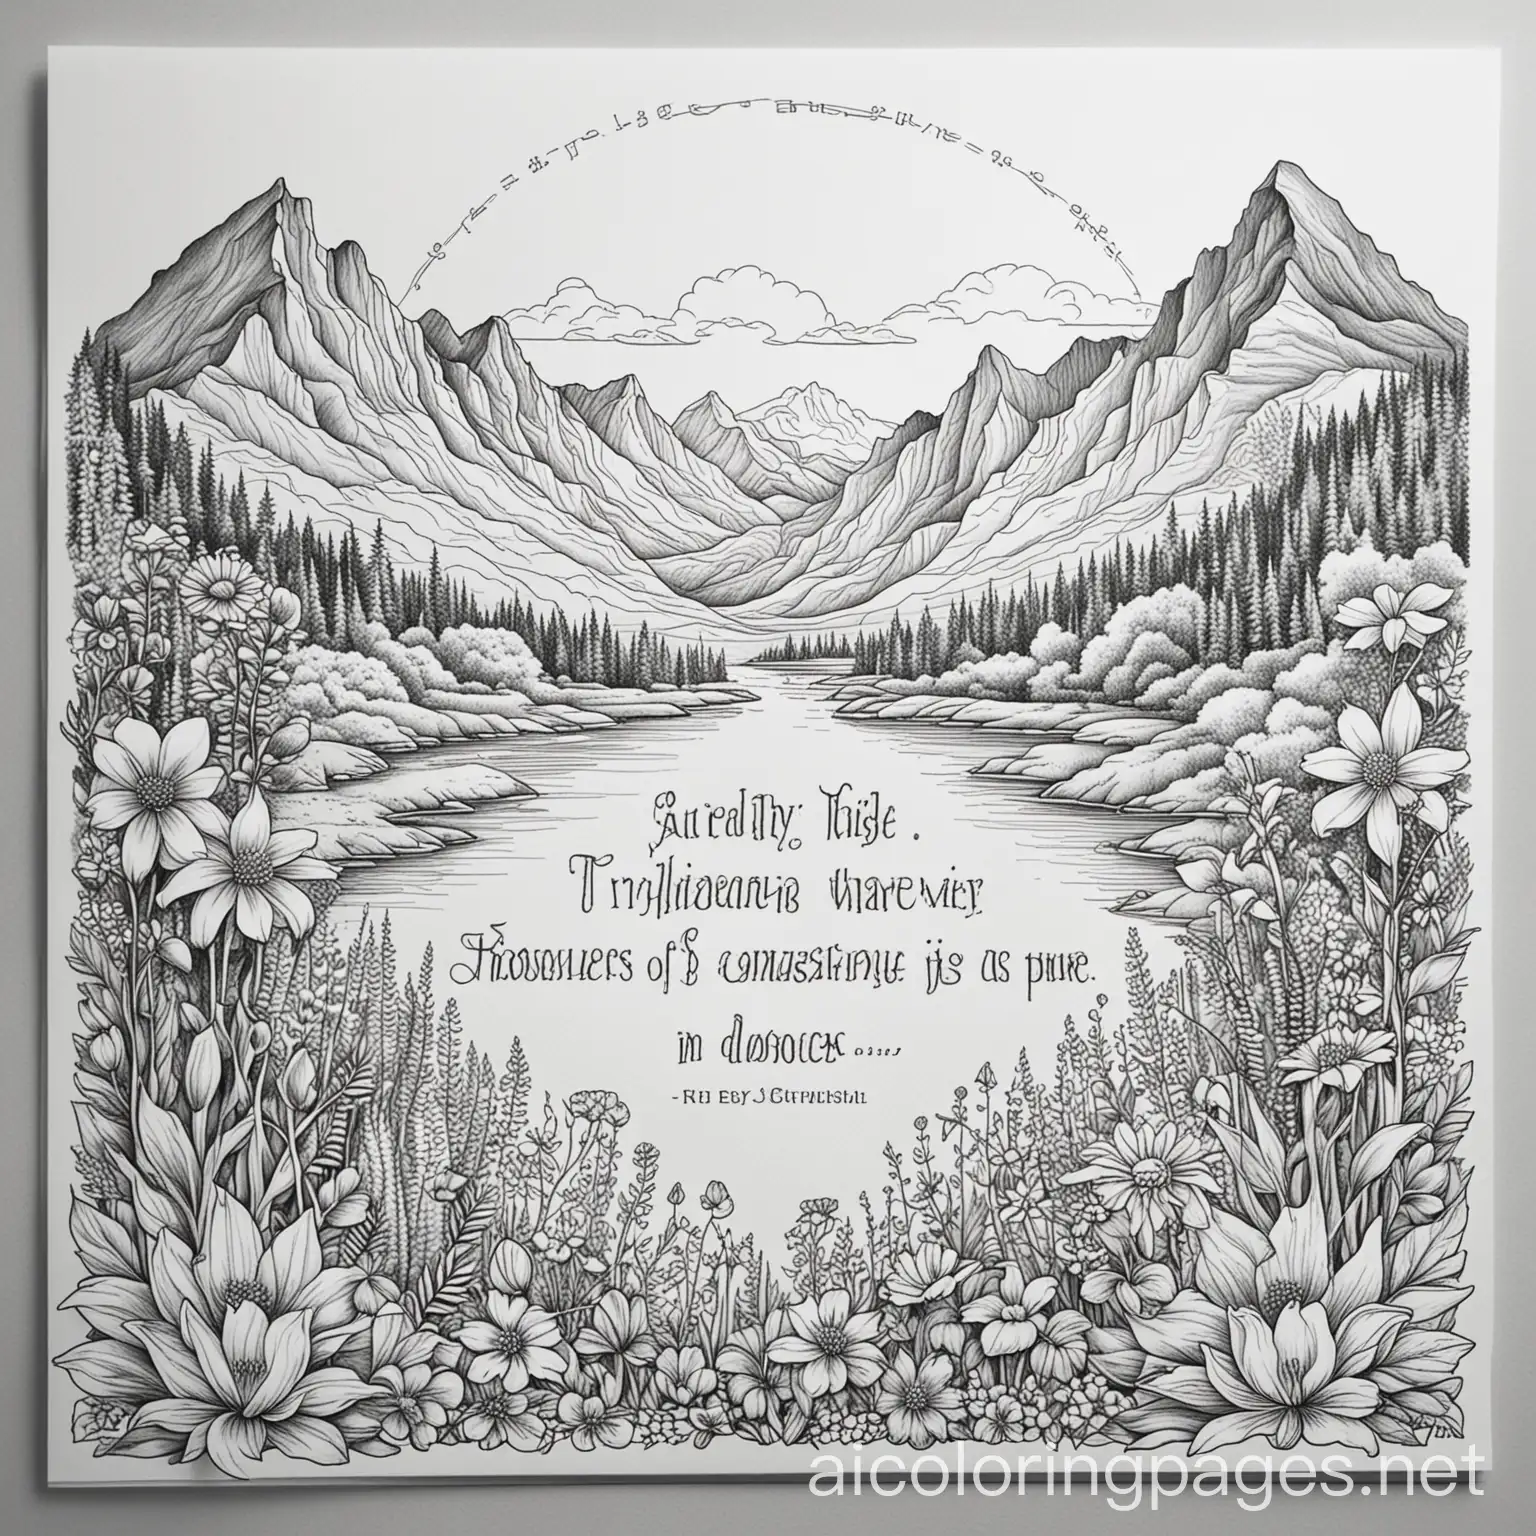 Generate a coloring page with this text inside: "Enfin, frères et sœurs, portez vos pensées sur tout ce qui est vrai, tout ce qui est honorable, tout ce qui est juste, tout ce qui est pur, tout ce qui est digne d'être aimé, tout ce qui mérite l'approbation, ce qui est synonyme de qualité morale et ce qui est digne de louange. Philippiens 4:8" surrounded by mountains and flowers , Coloring Page, black and white, line art, white background, Simplicity, Ample White Space. The background of the coloring page is plain white to make it easy for young children to color within the lines. The outlines of all the subjects are easy to distinguish, making it simple for kids to color without too much difficulty